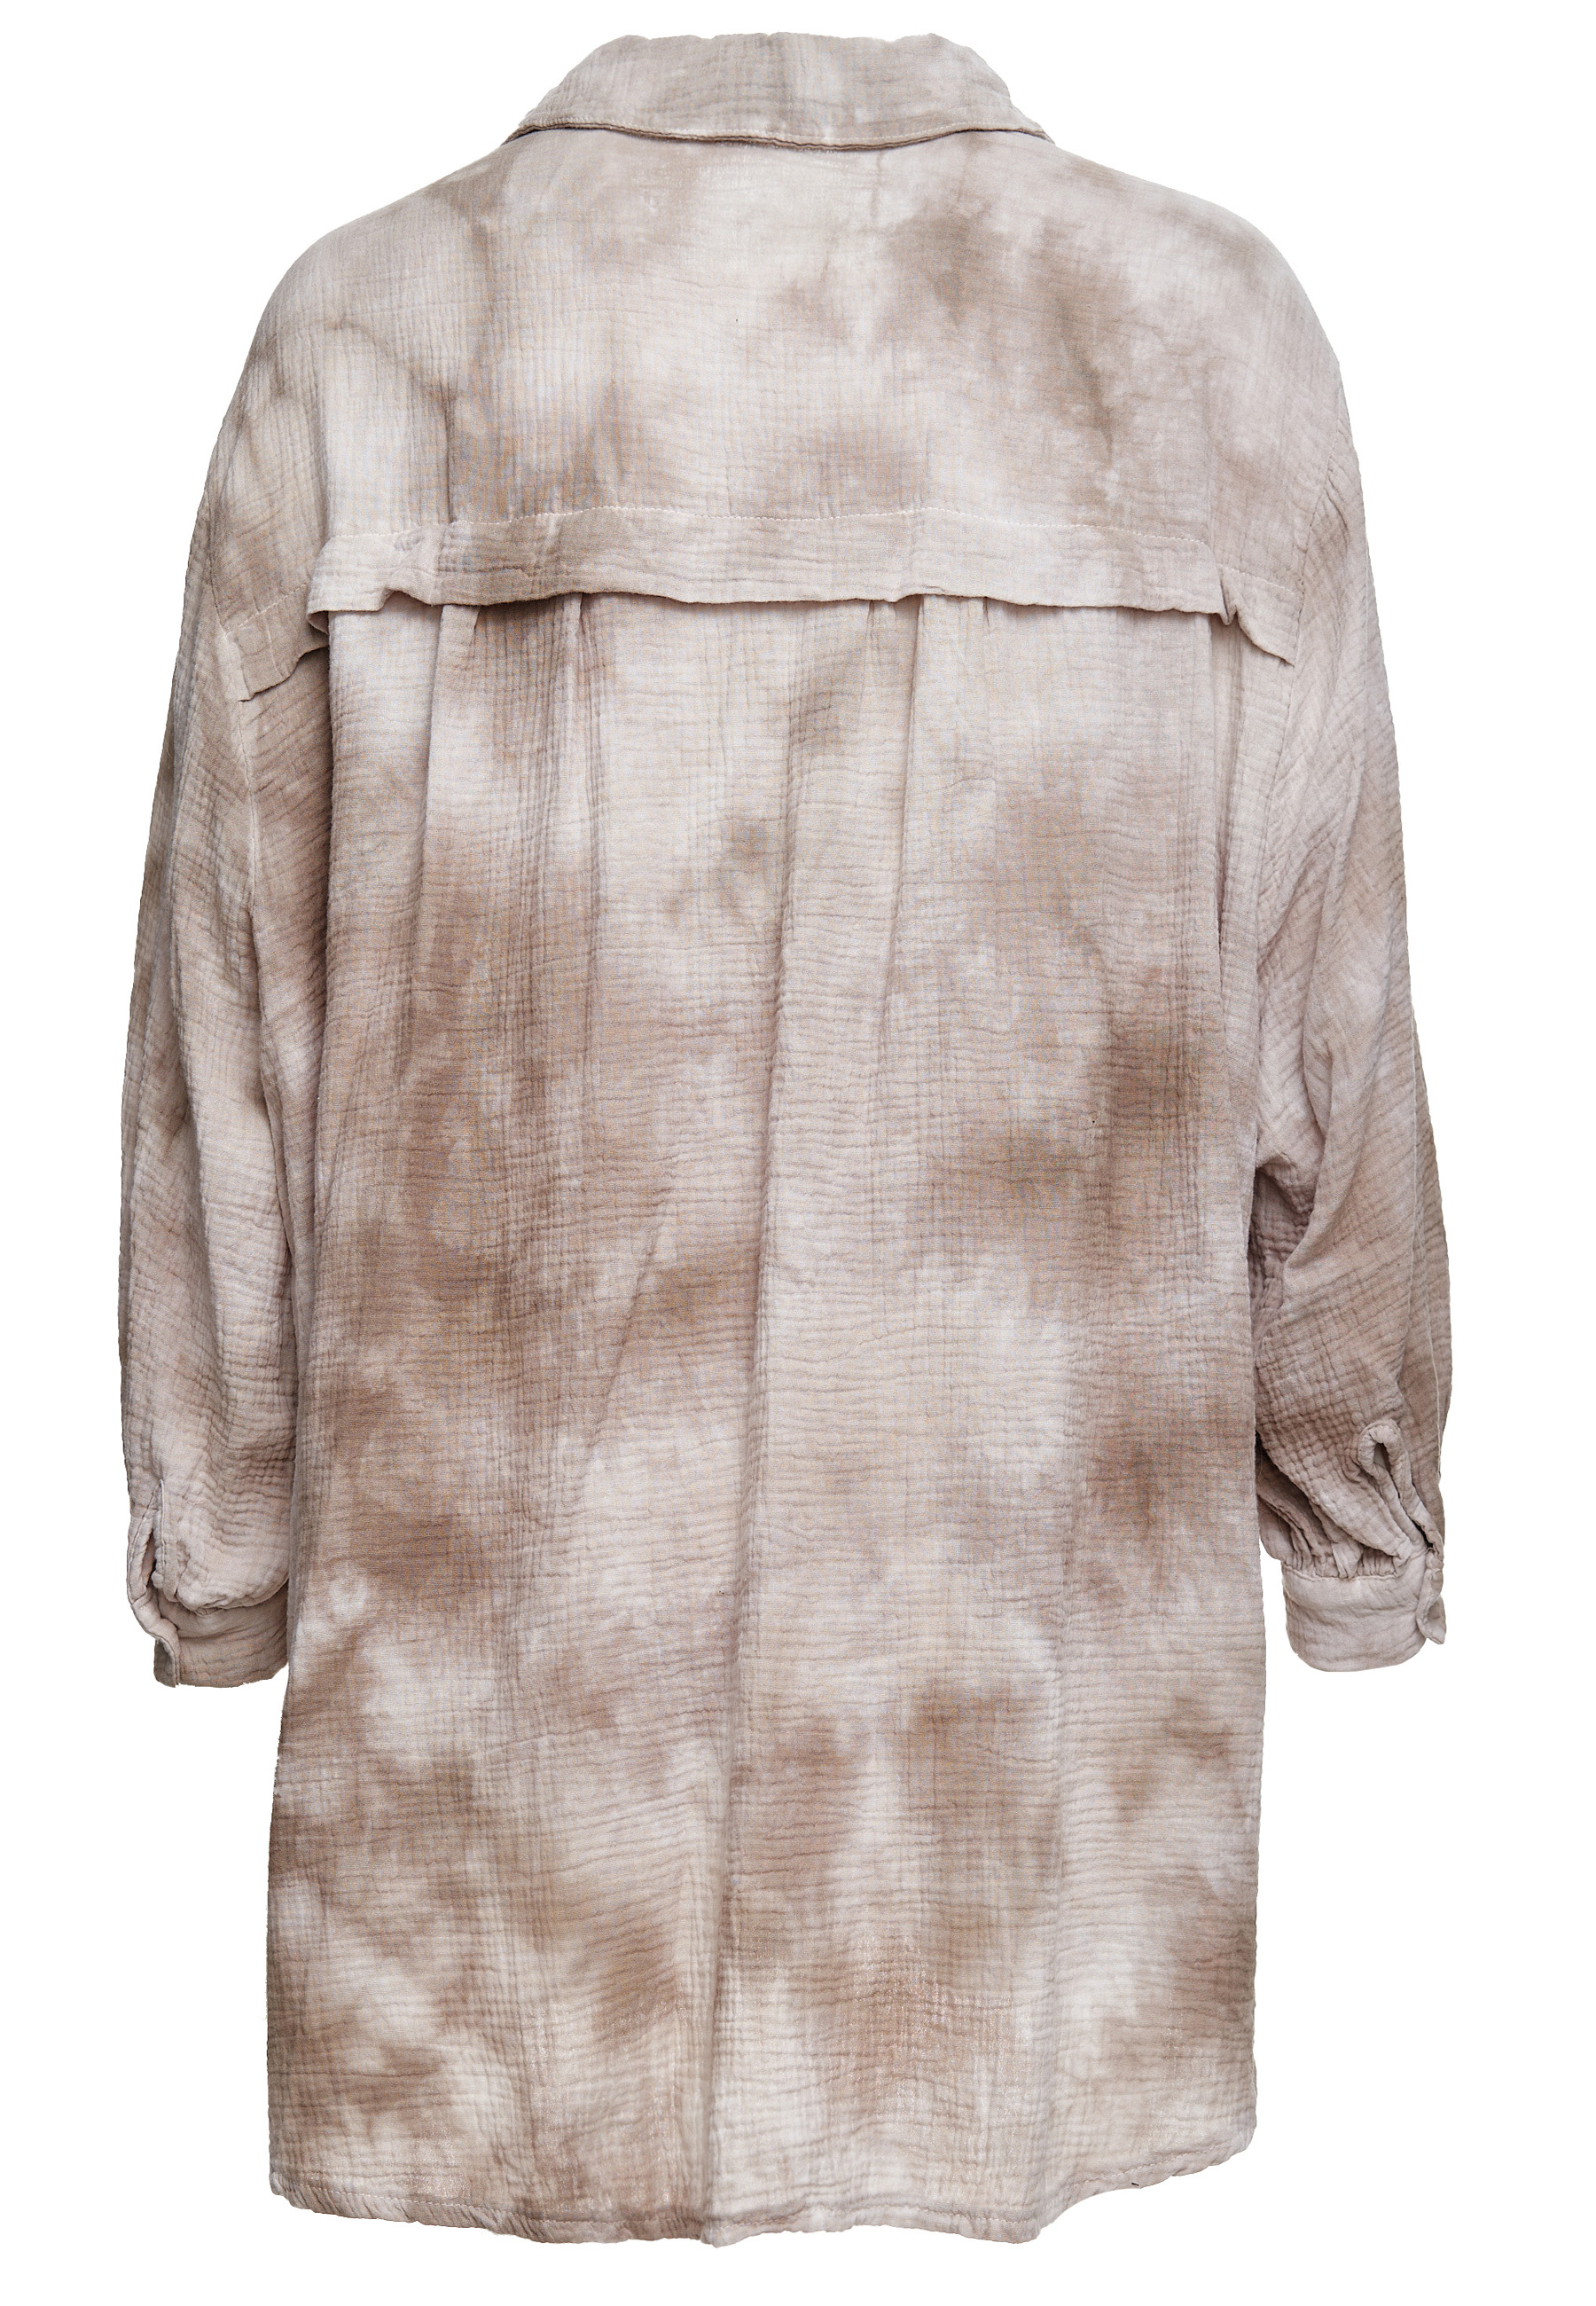 Decay Bluse in Beige 